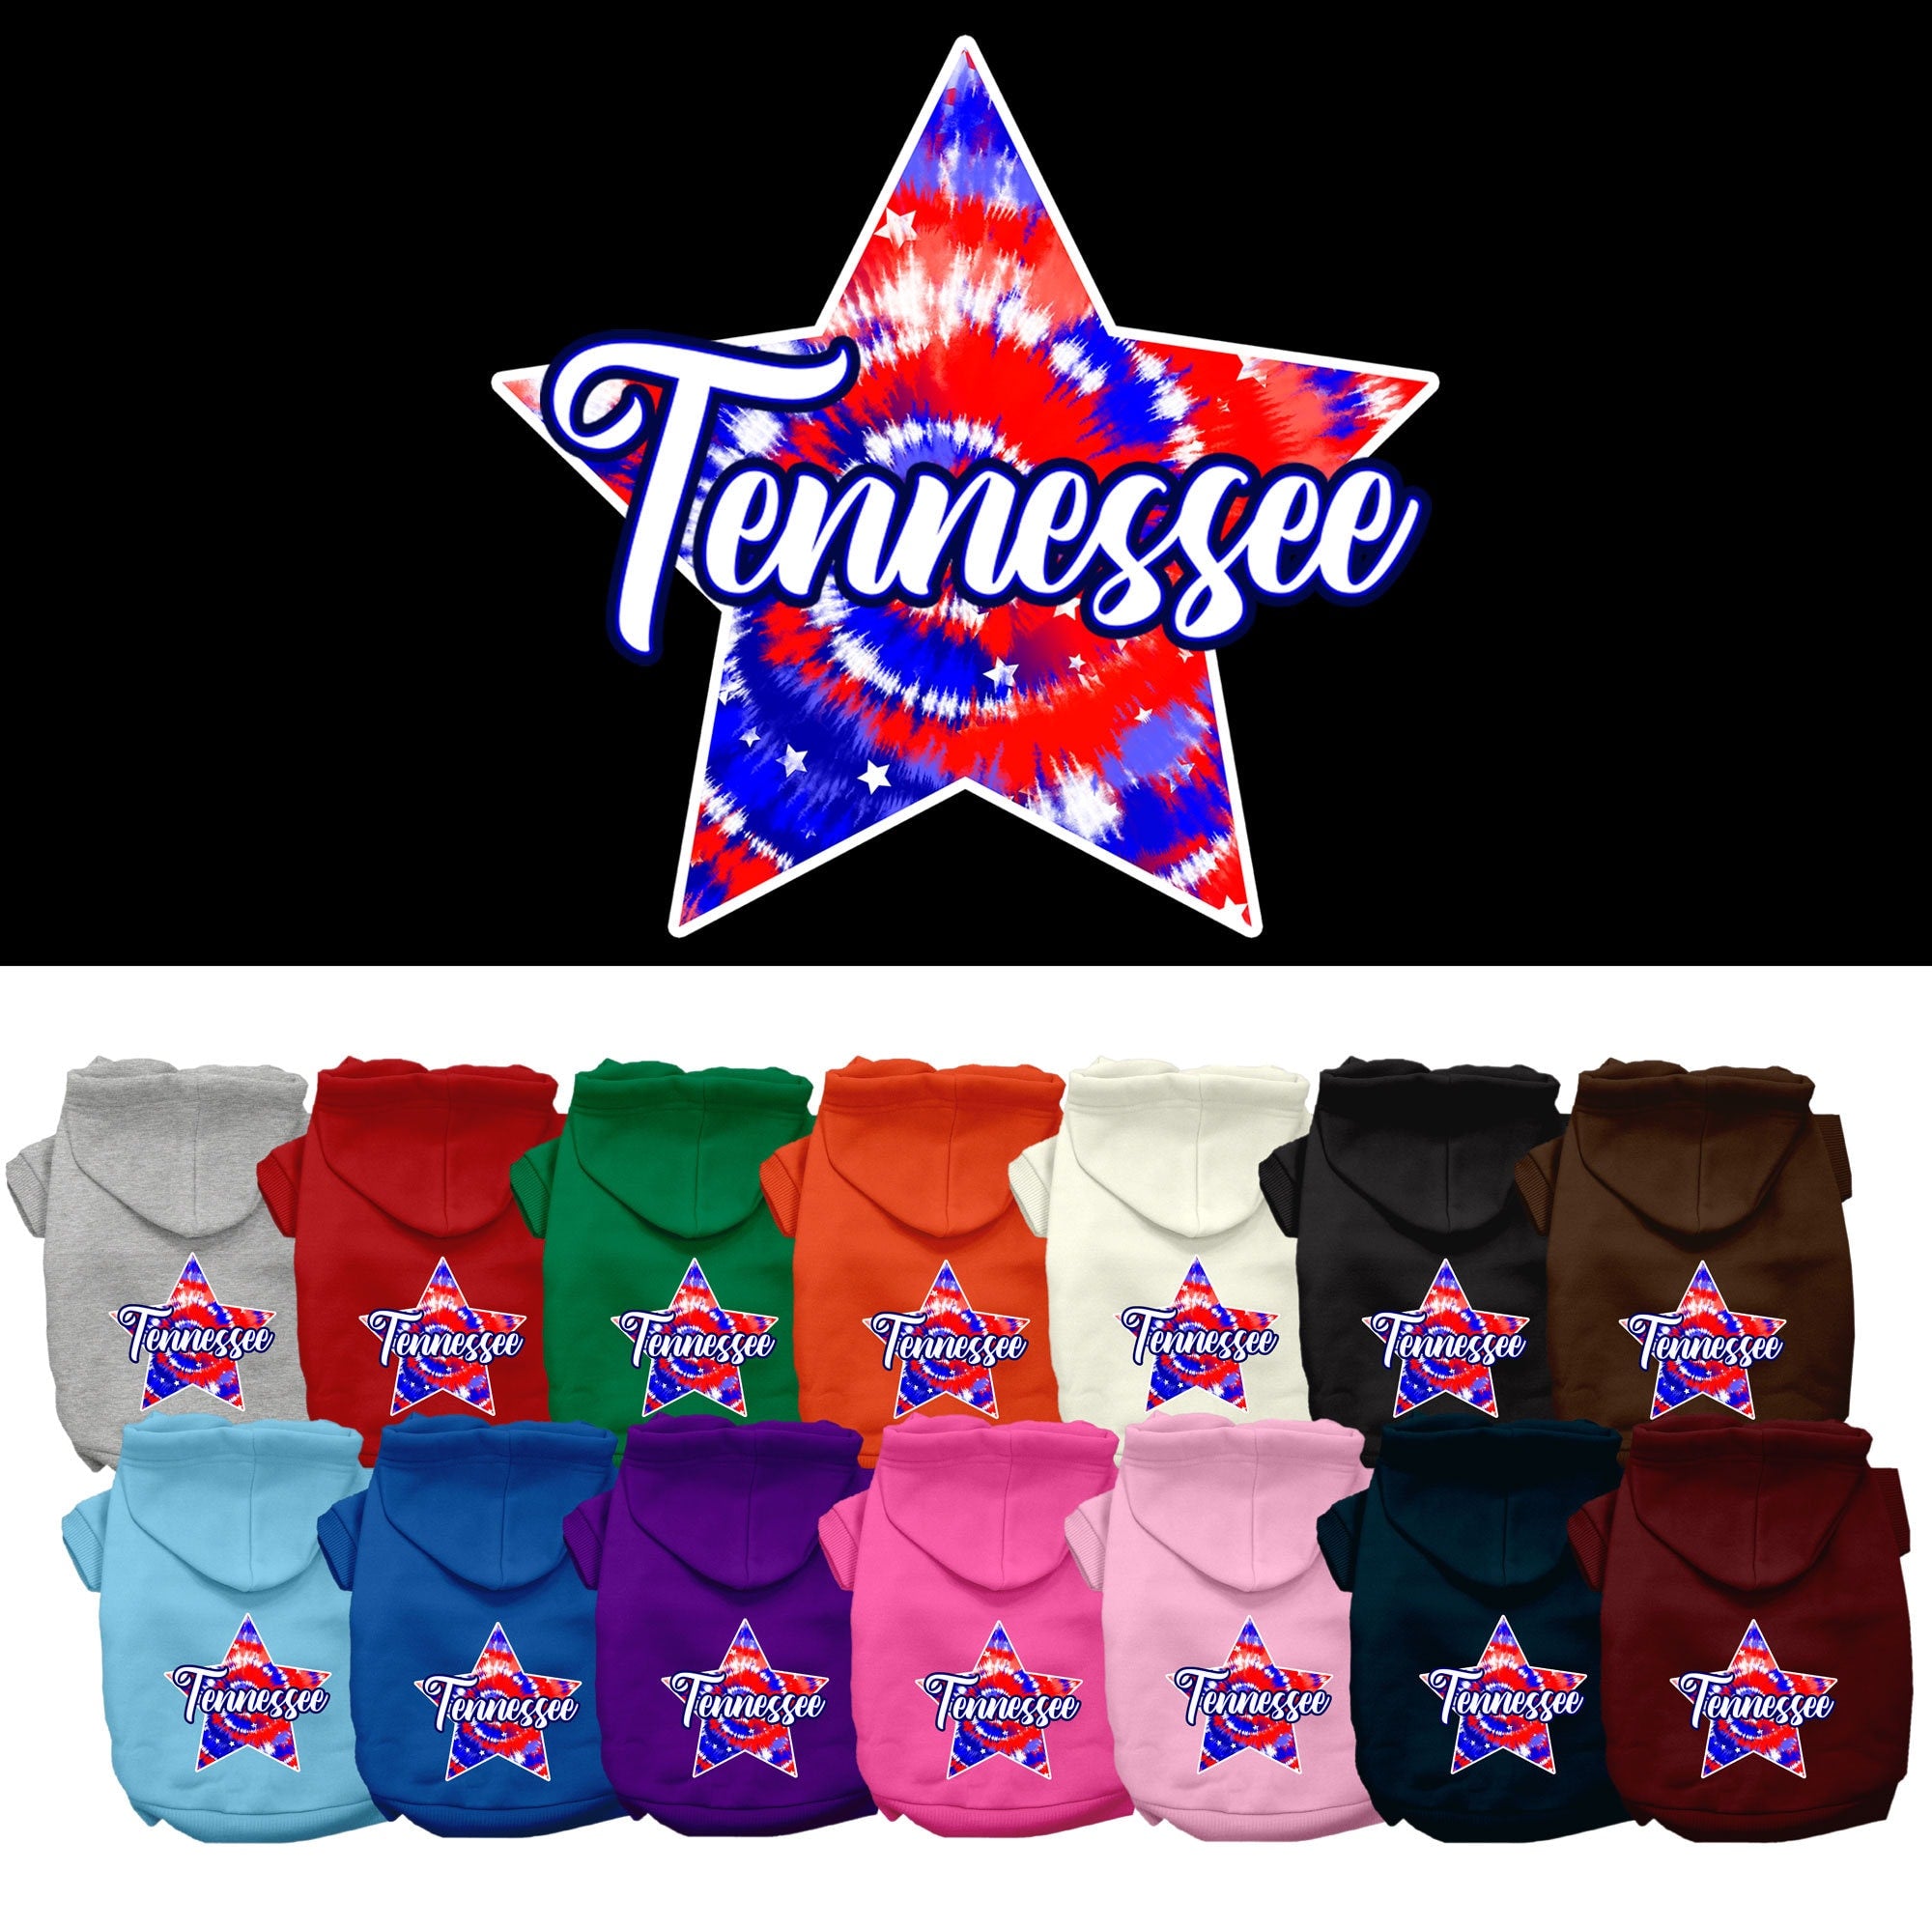 Pet Dog & Cat Screen Printed Hoodie for Medium to Large Pets (Sizes 2XL-6XL), &quot;Tennessee Patriotic Tie Dye&quot;